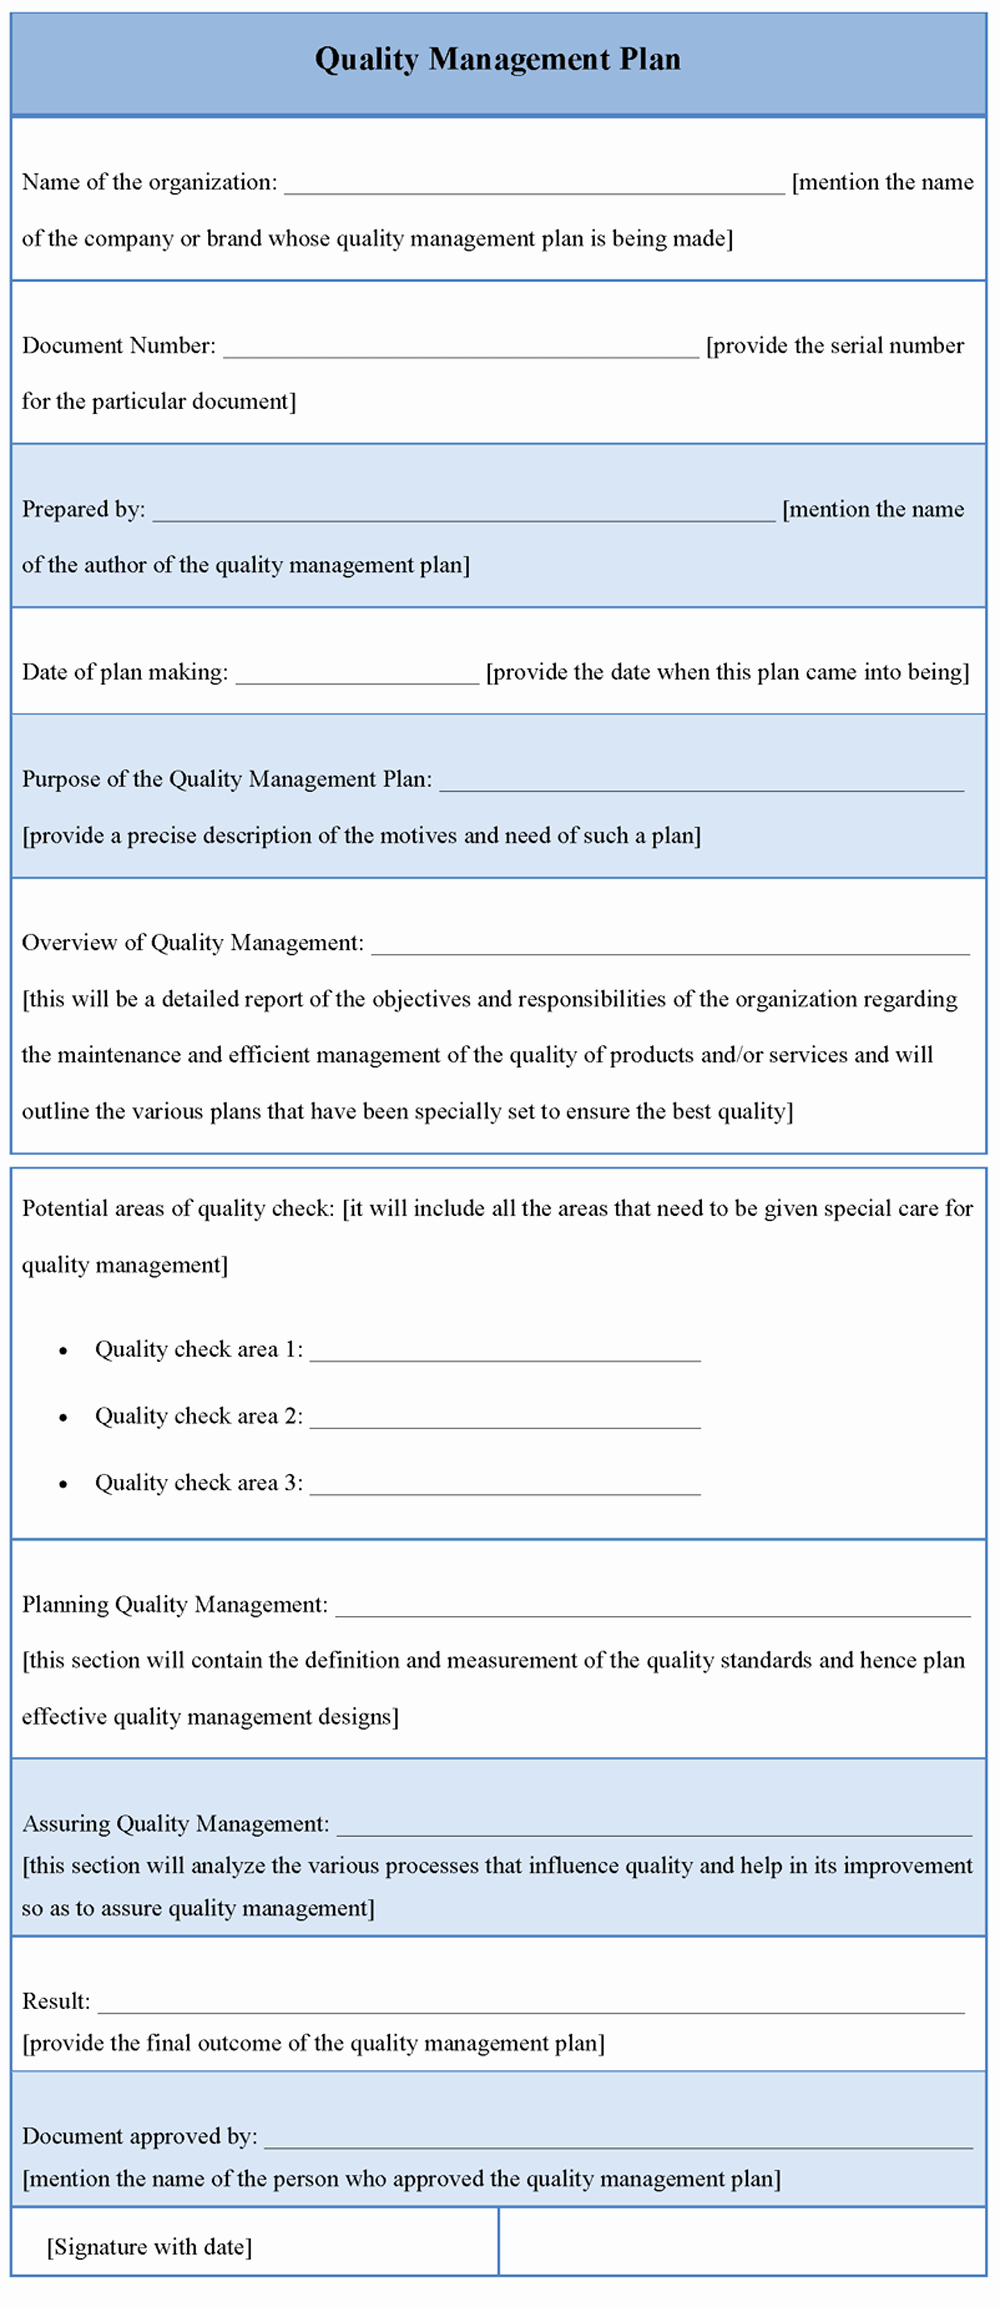 Quality Management Plan Templates Awesome Quality Management Plan Template